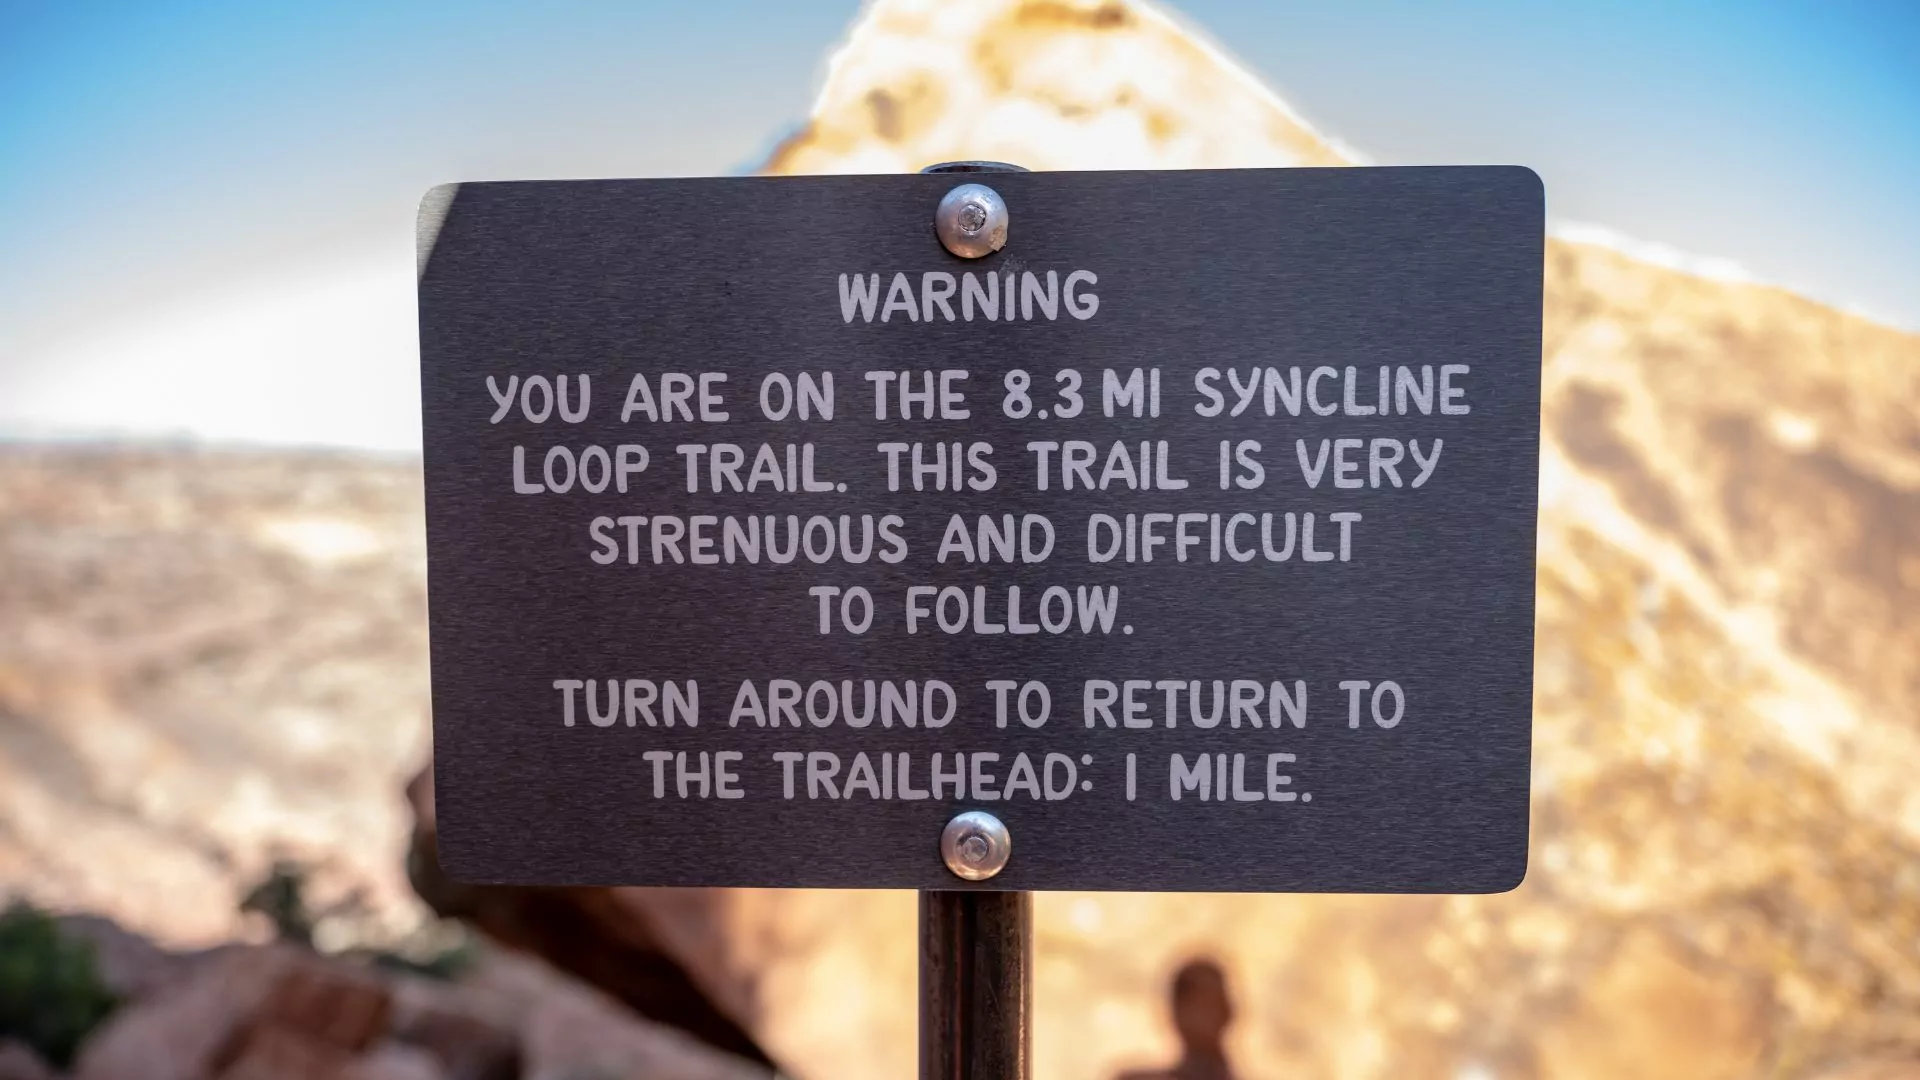 Warning sign on the Syncline Loop in Canyonlands National Park notes trail is strenuous